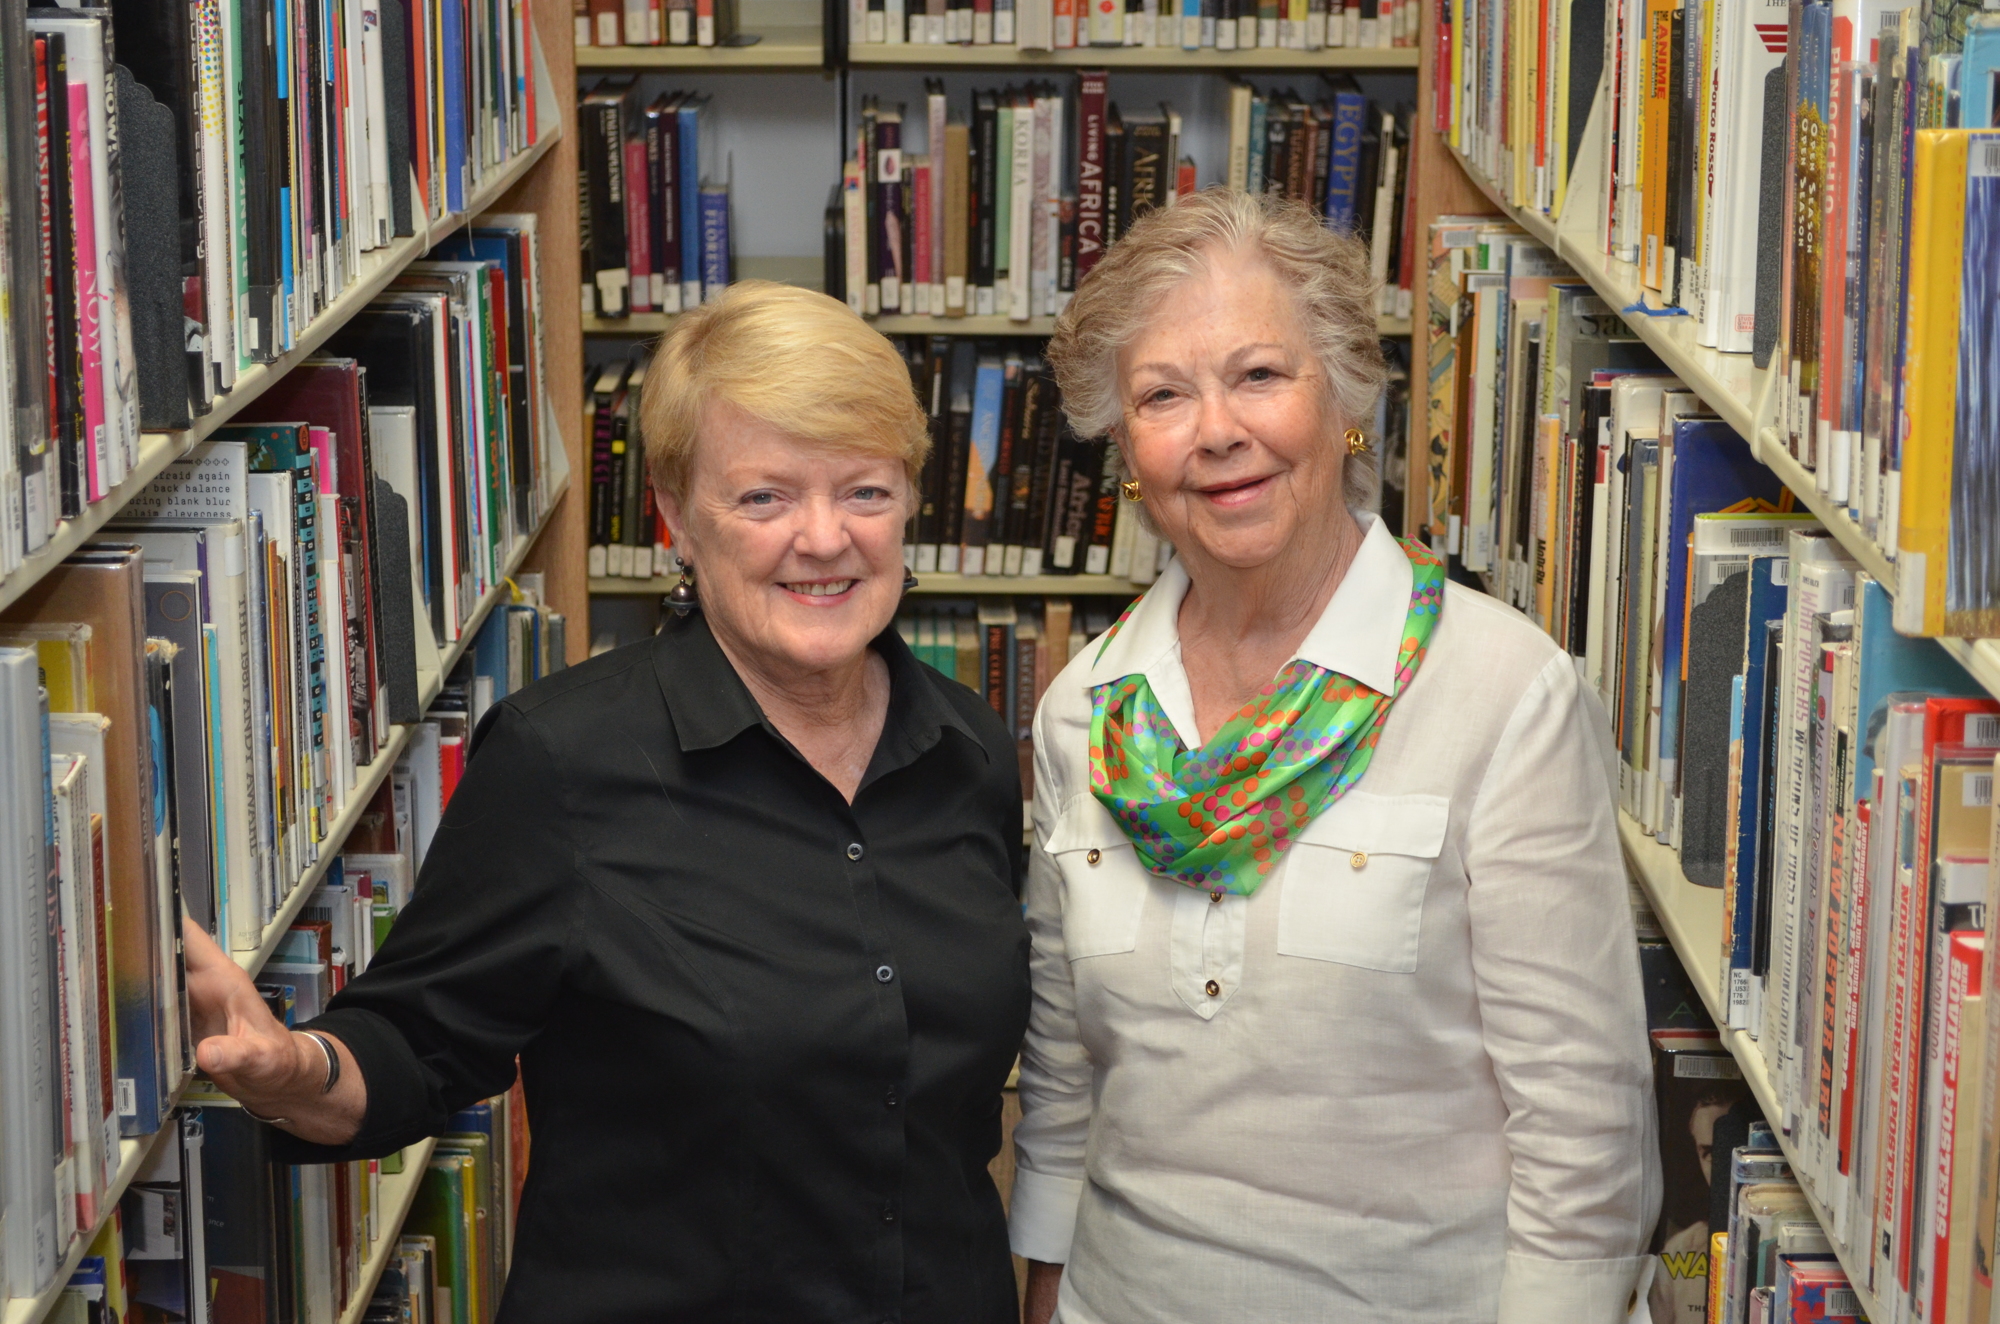 Carolyn Johnson and Isabel Norton helped lead the Ringling College library fundraising campaign.